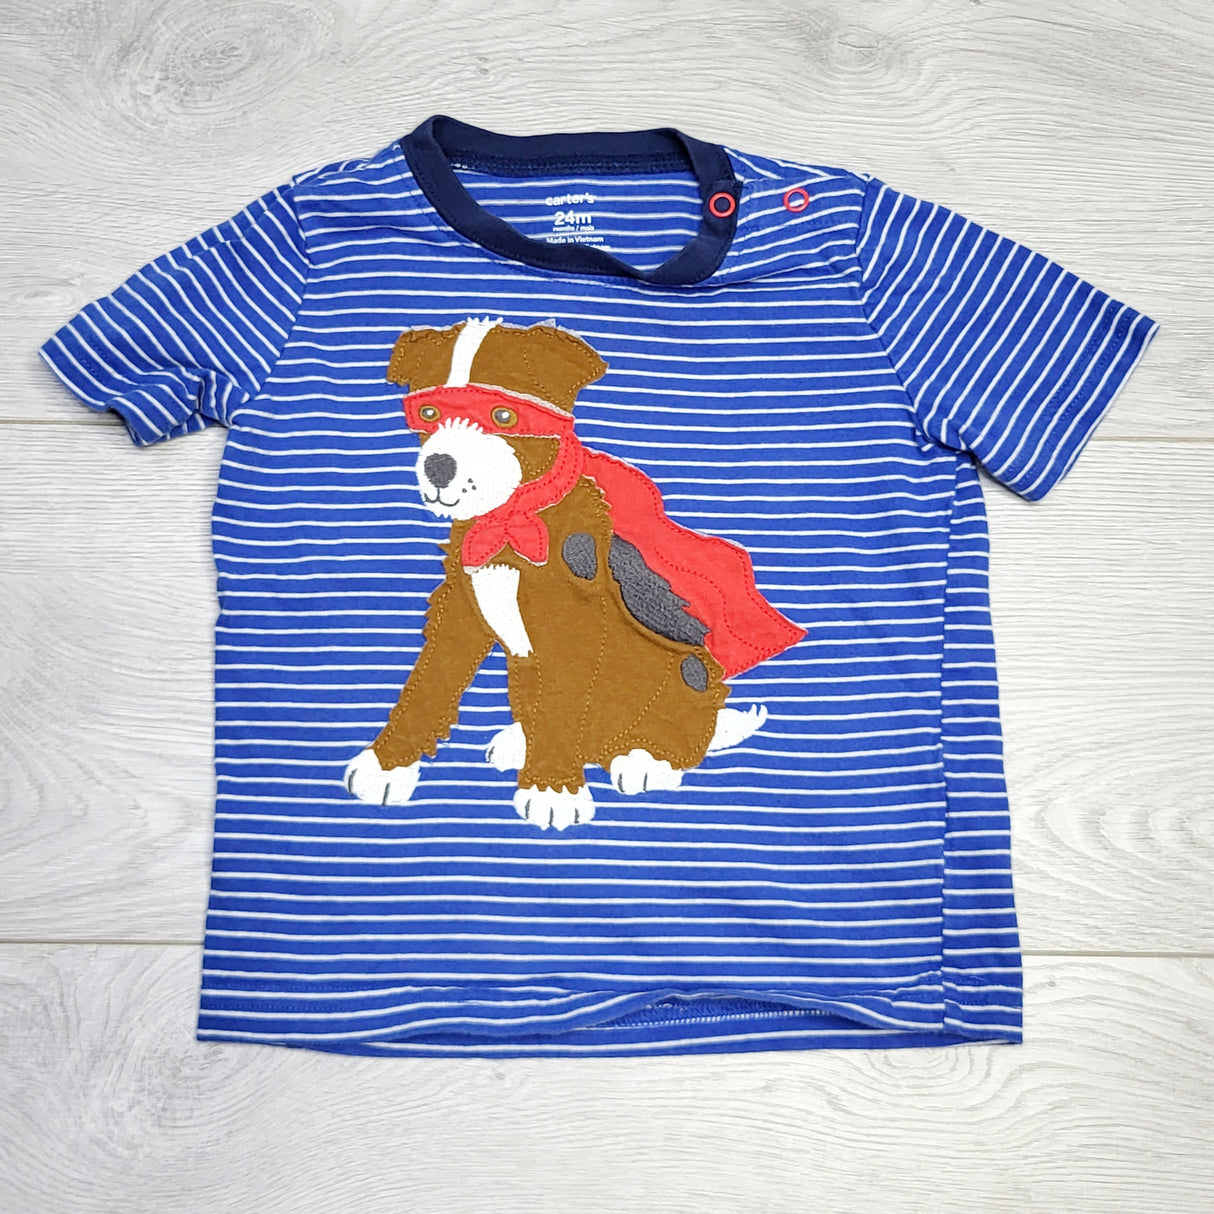 RZA2 - Carters blue striped t-shirt with super hero dog. Size 24 months